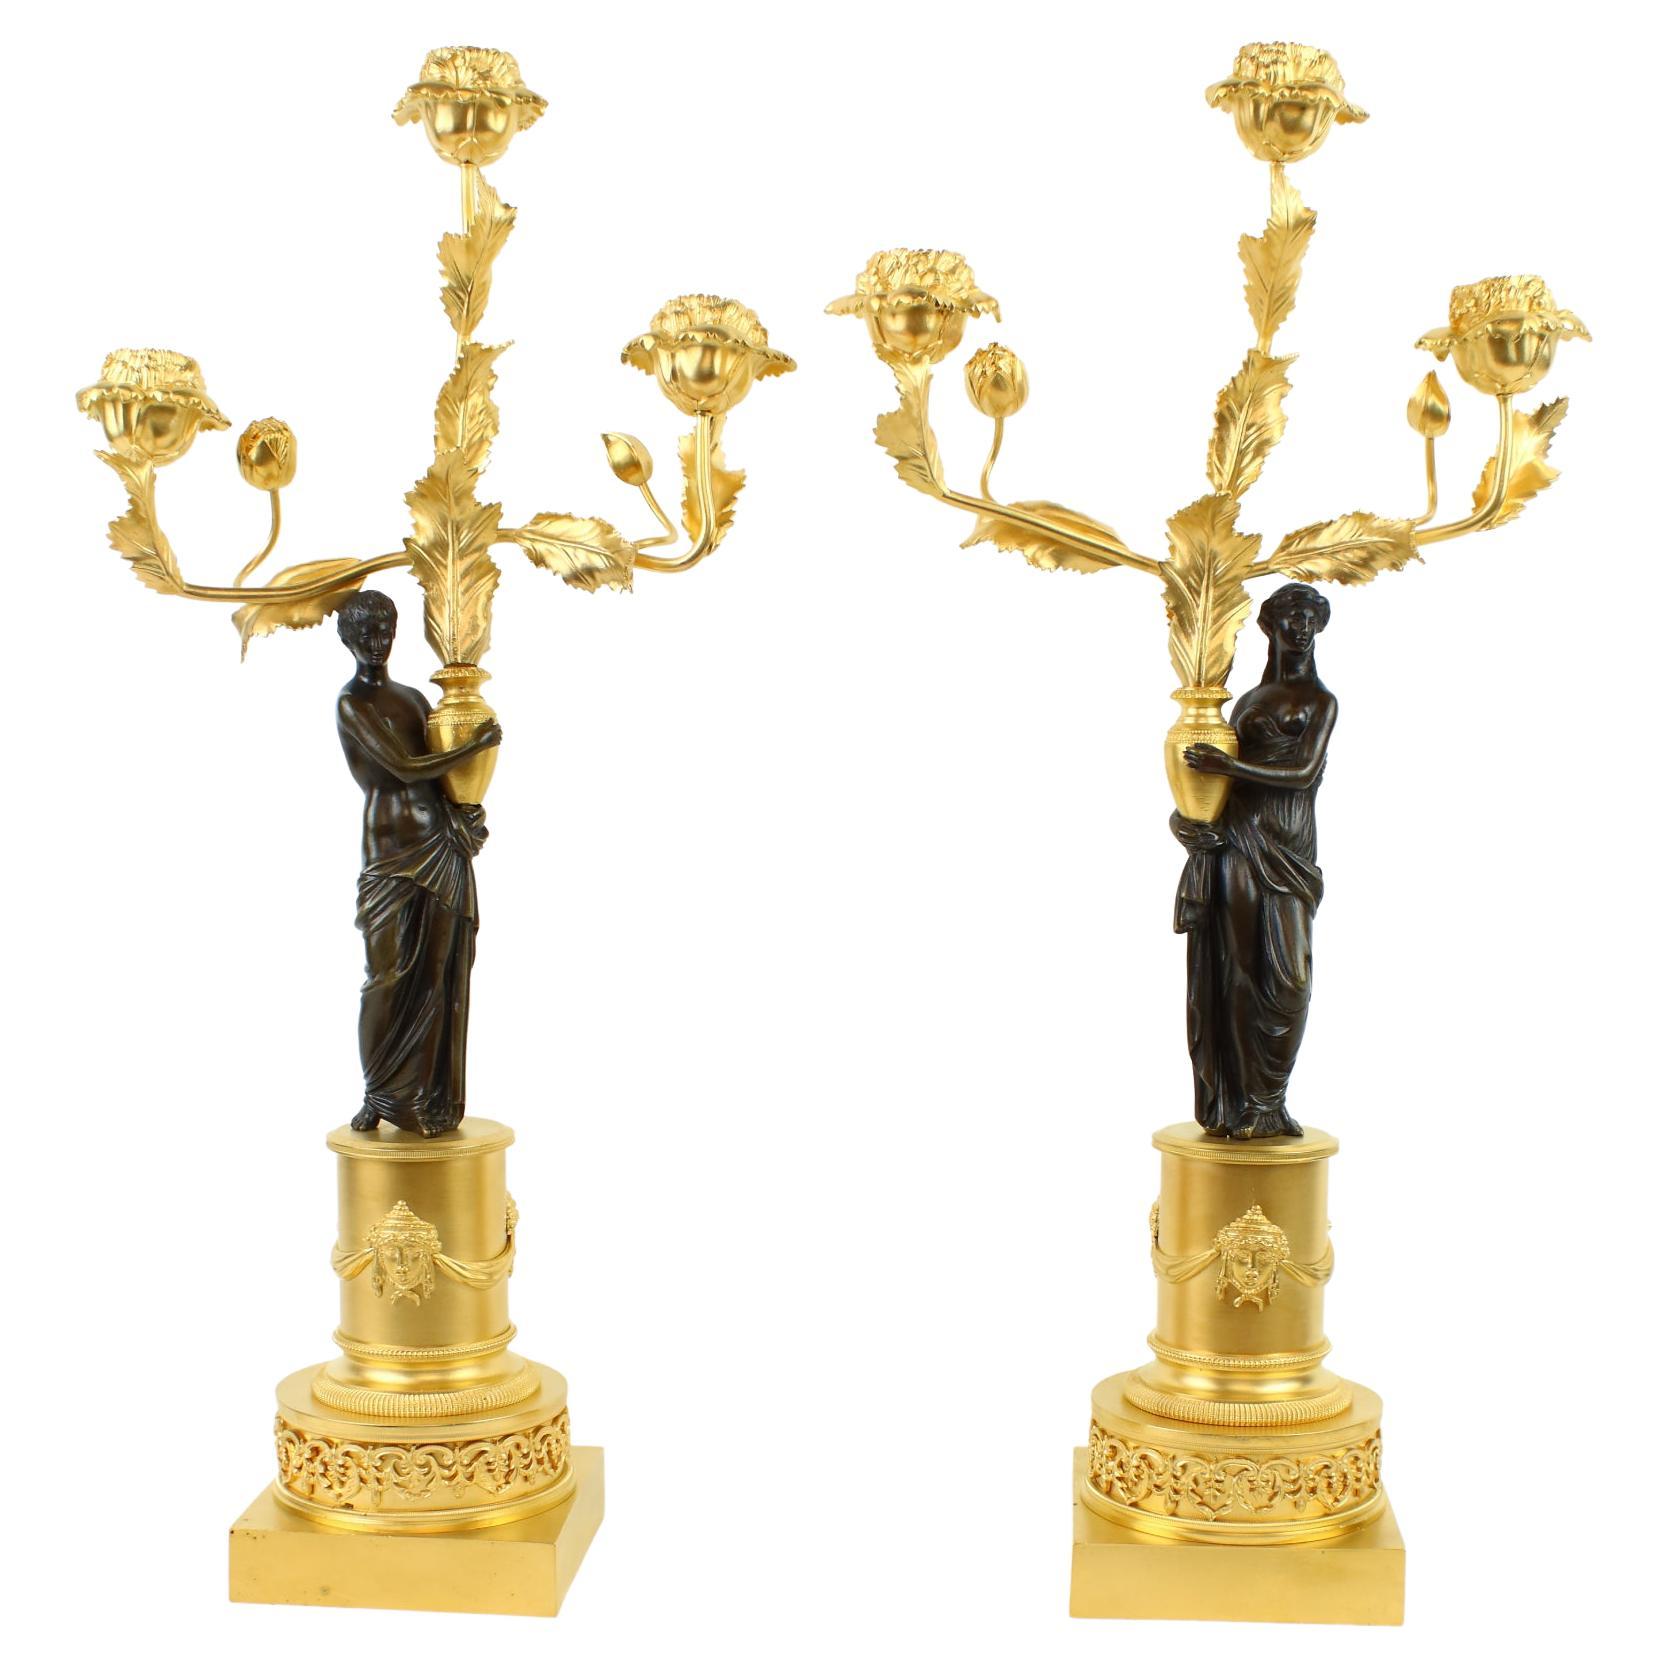 18th/19th Century Pair of Russian Figural Gilt and Patinated Bronze Candelabra For Sale